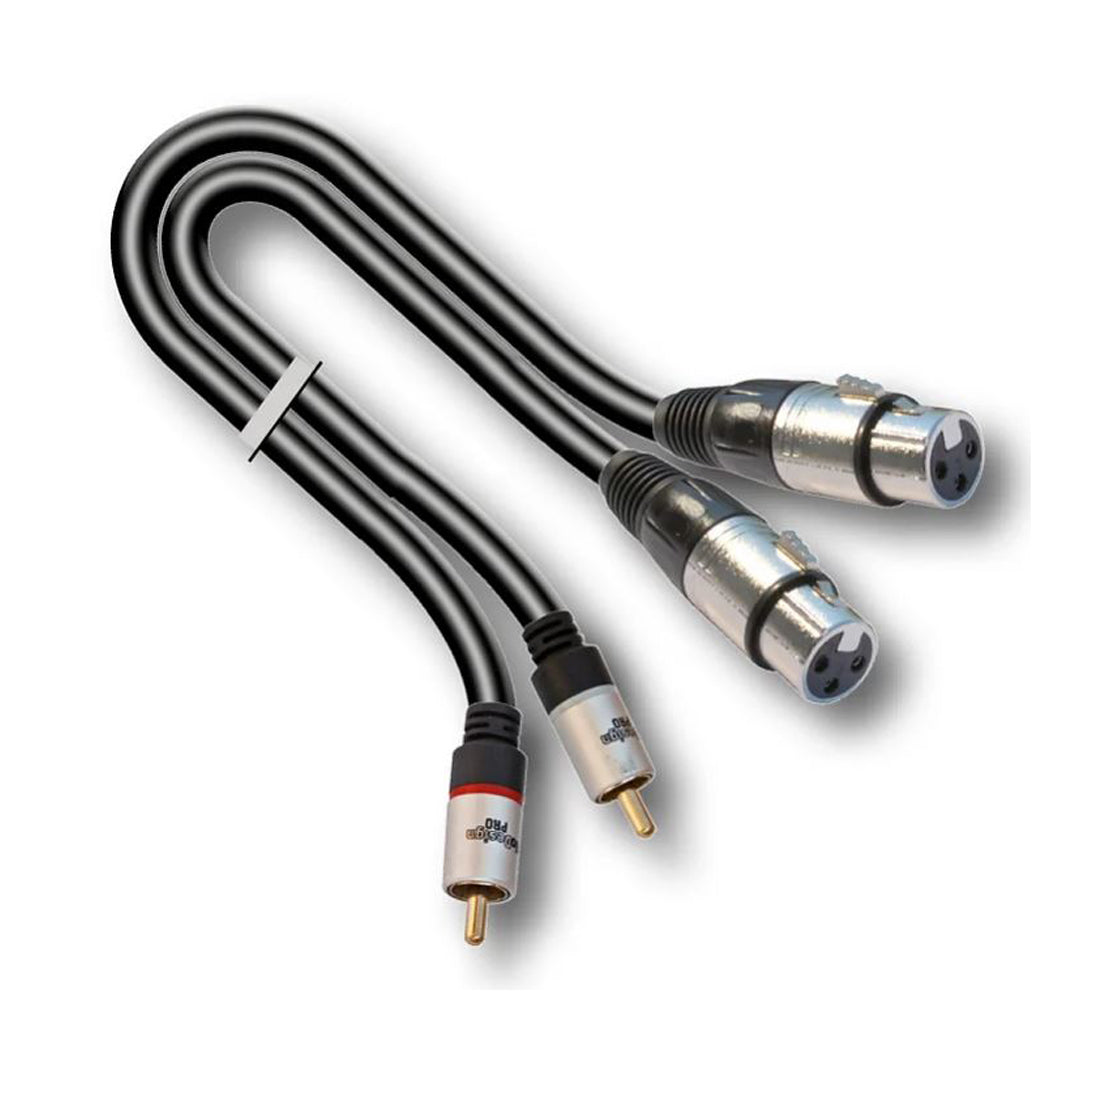 AudioDesign Pro Professional Adapter Cable 2 XLR 3 F, 2 RCA M, 3 m Length X-PRO LINE